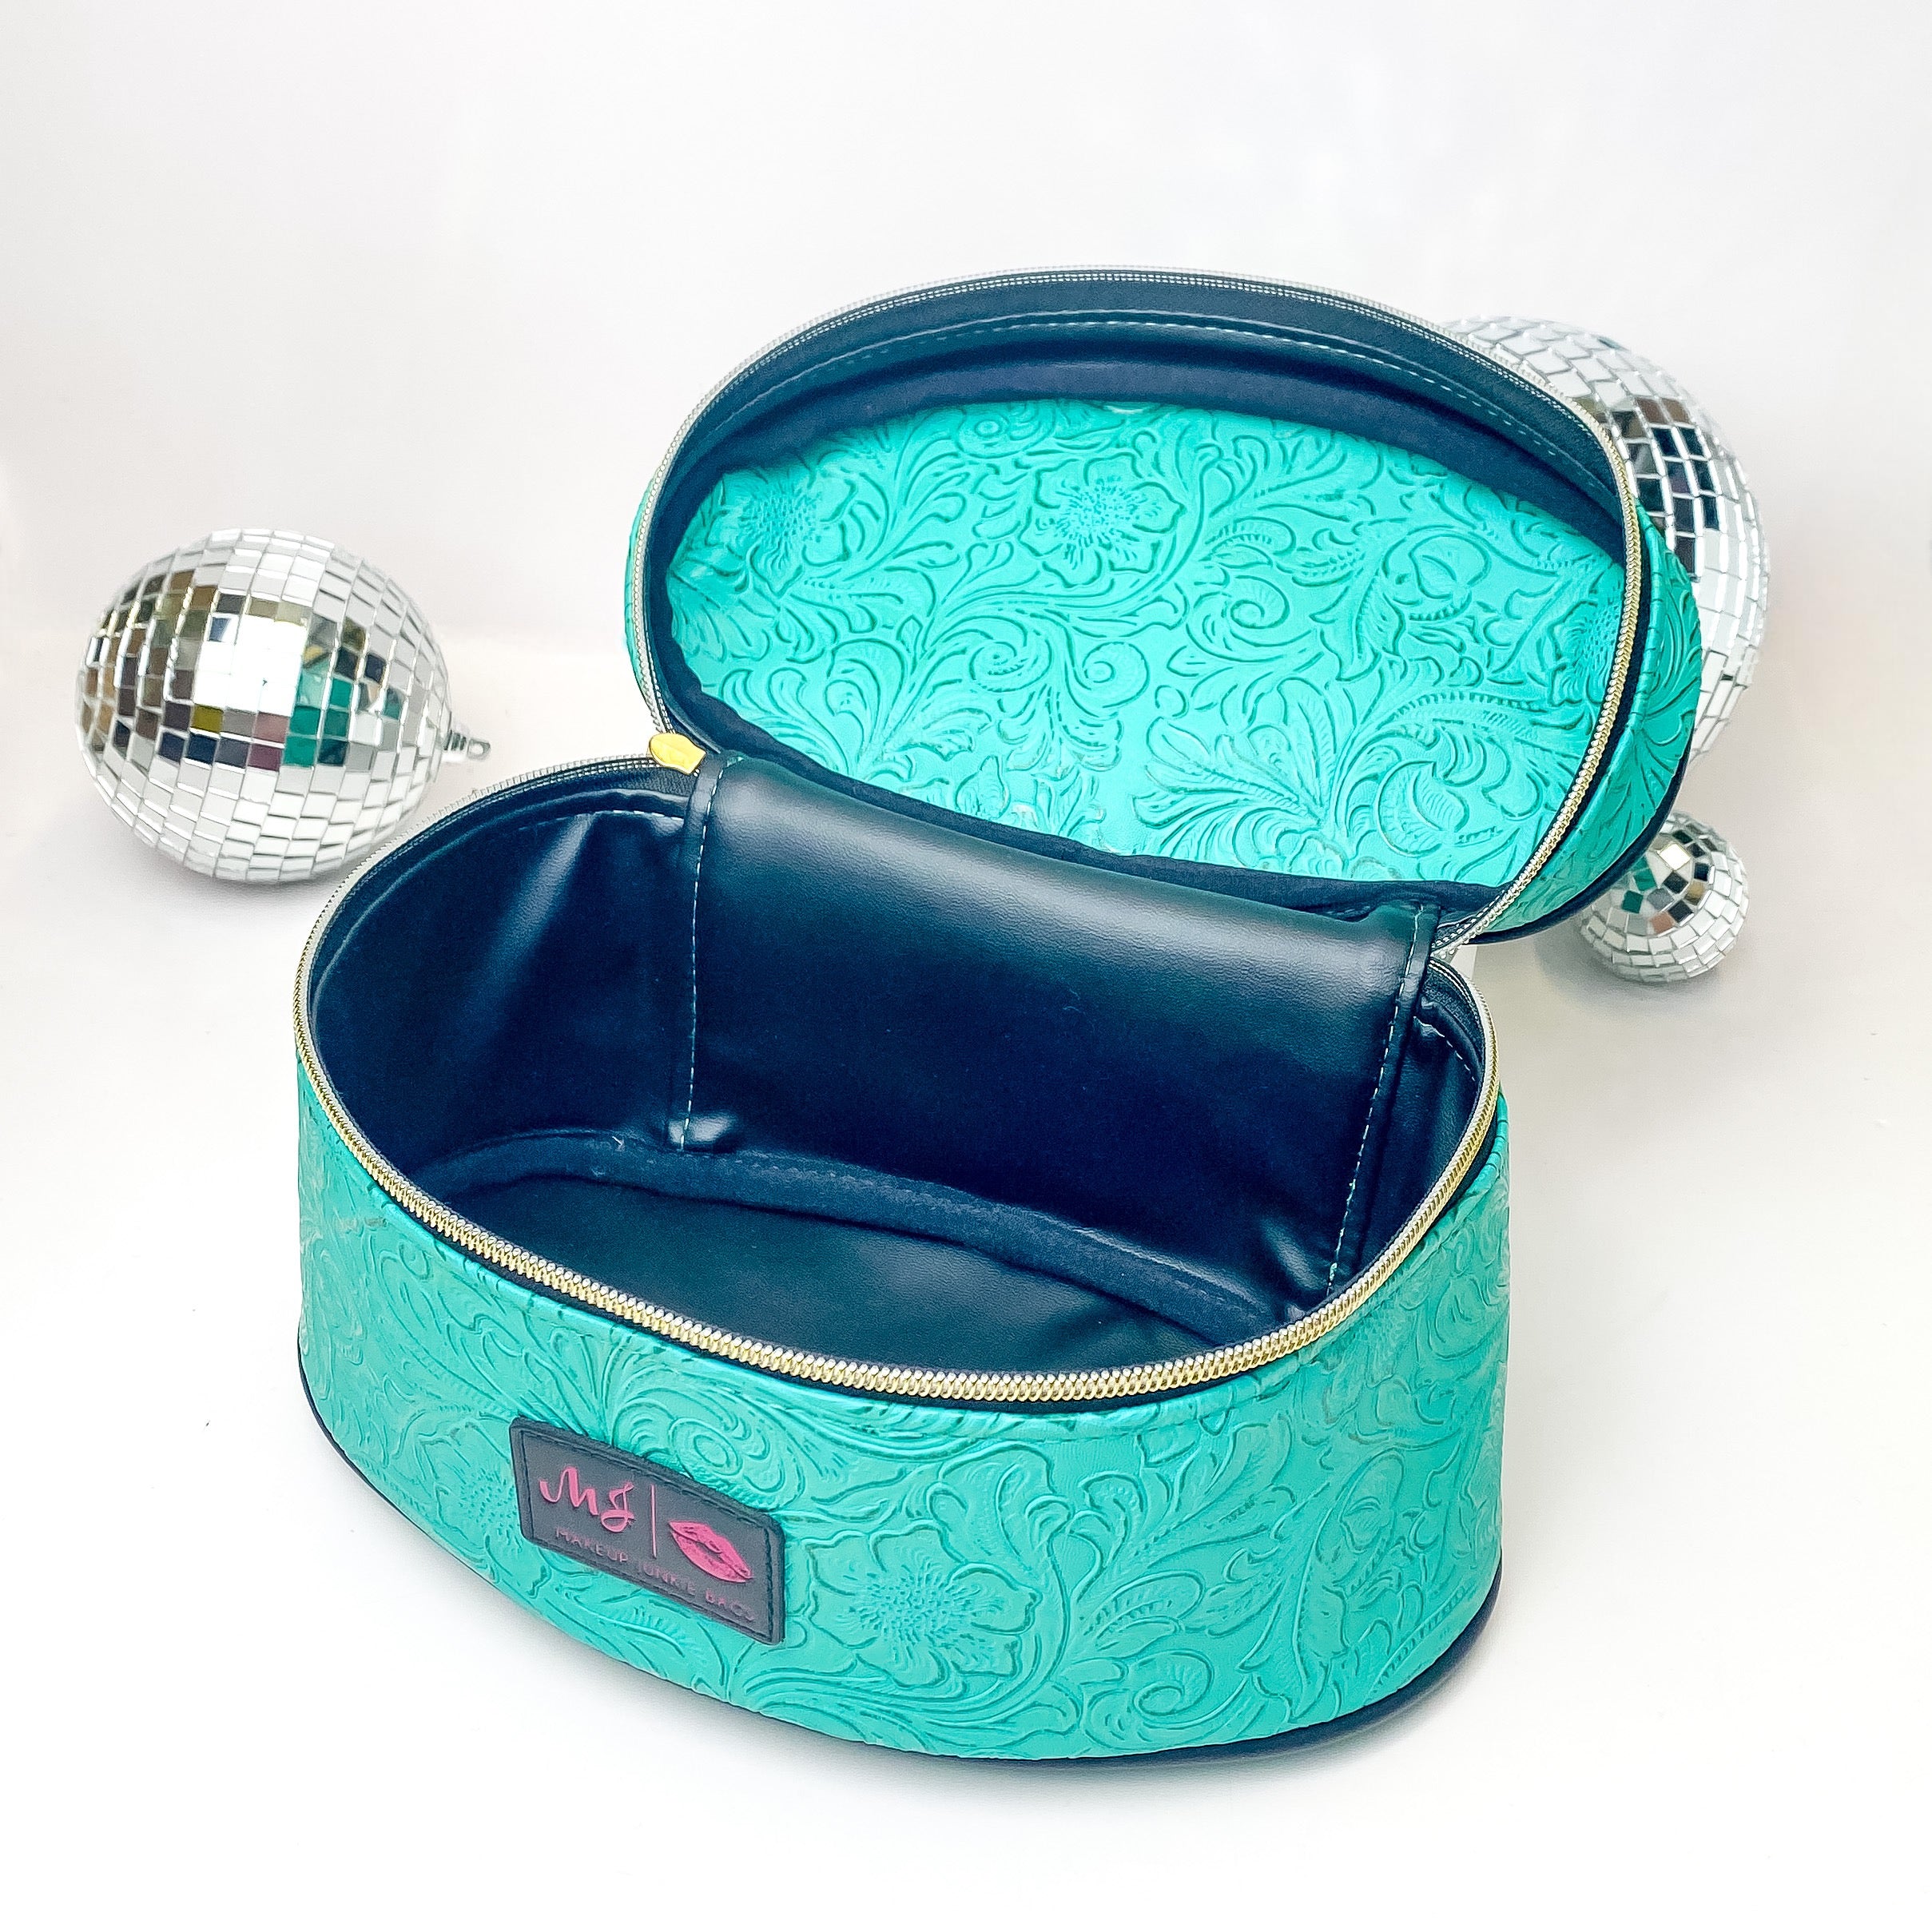 Makeup Junkie | Small Turquoise Dream Train Case in Turquoise Green Tooled Print - Giddy Up Glamour Boutique